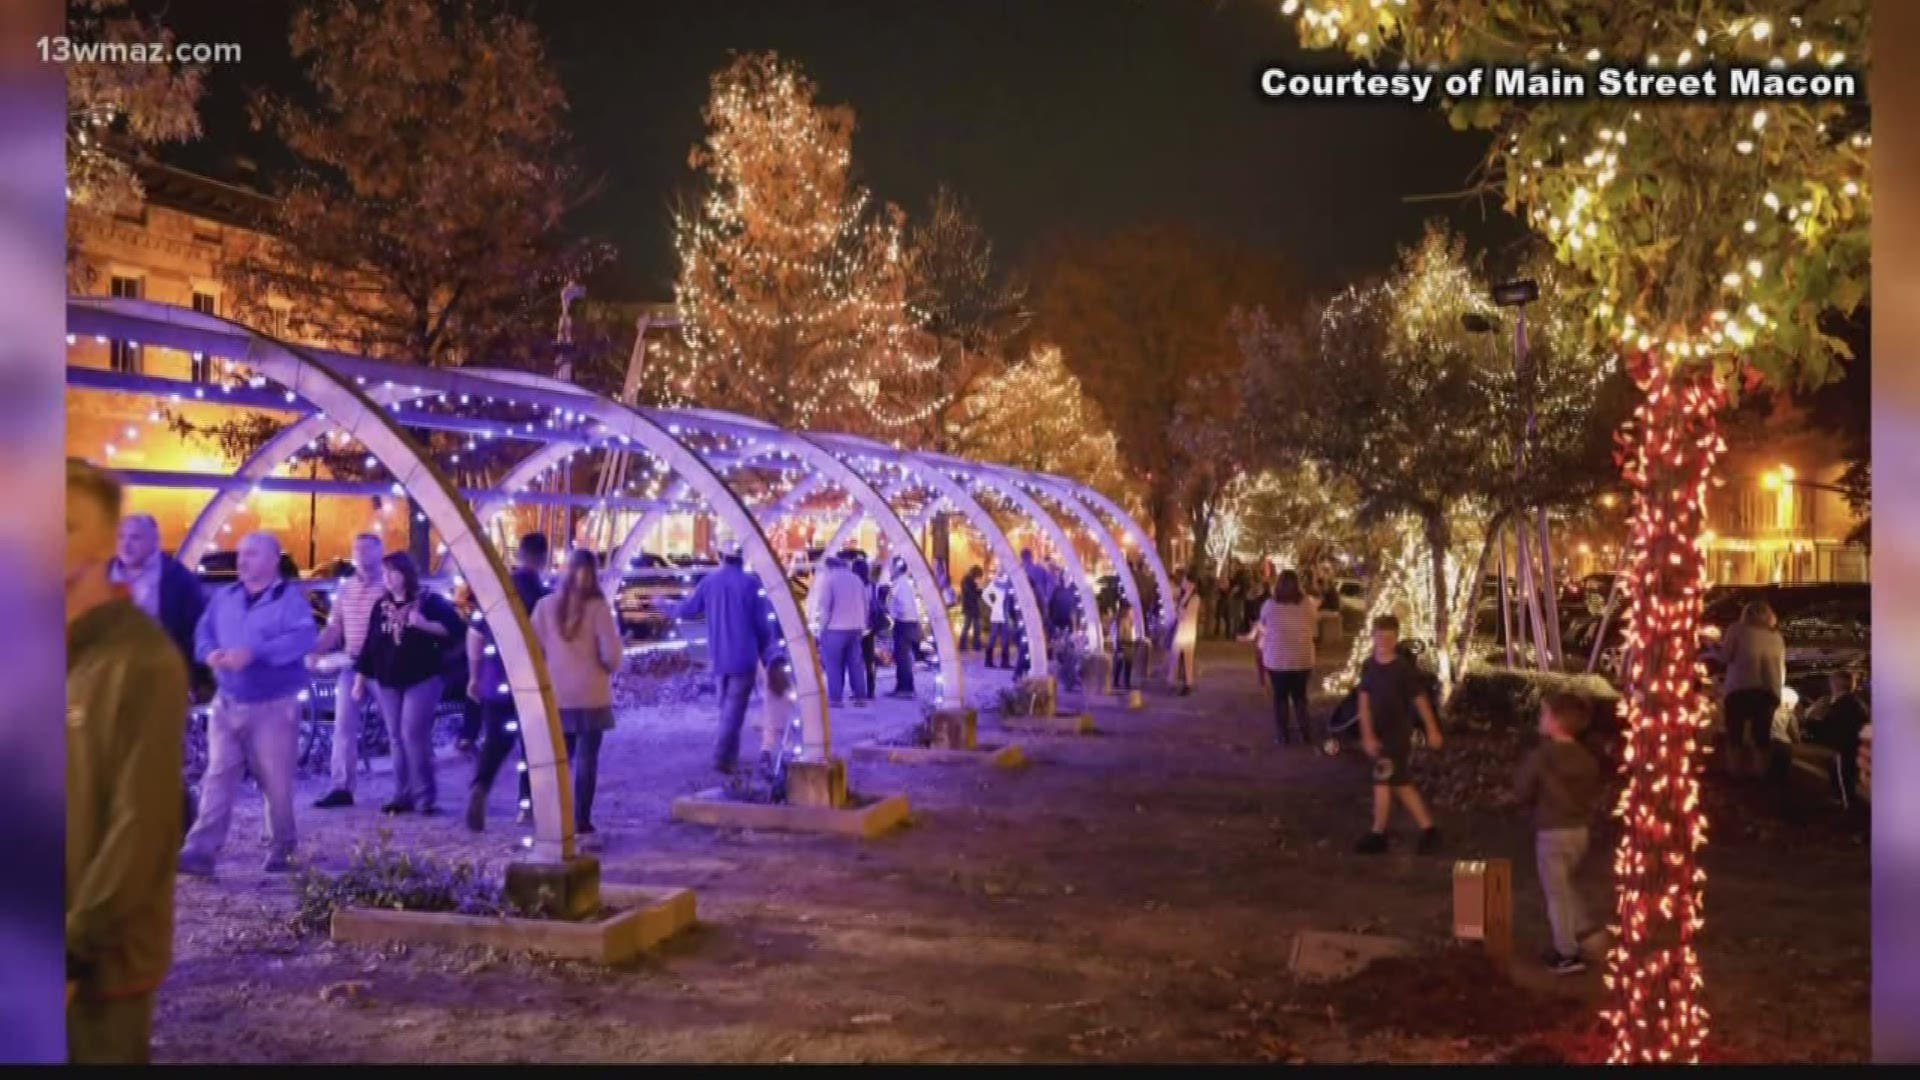 Macon Christmas light show will be expanding